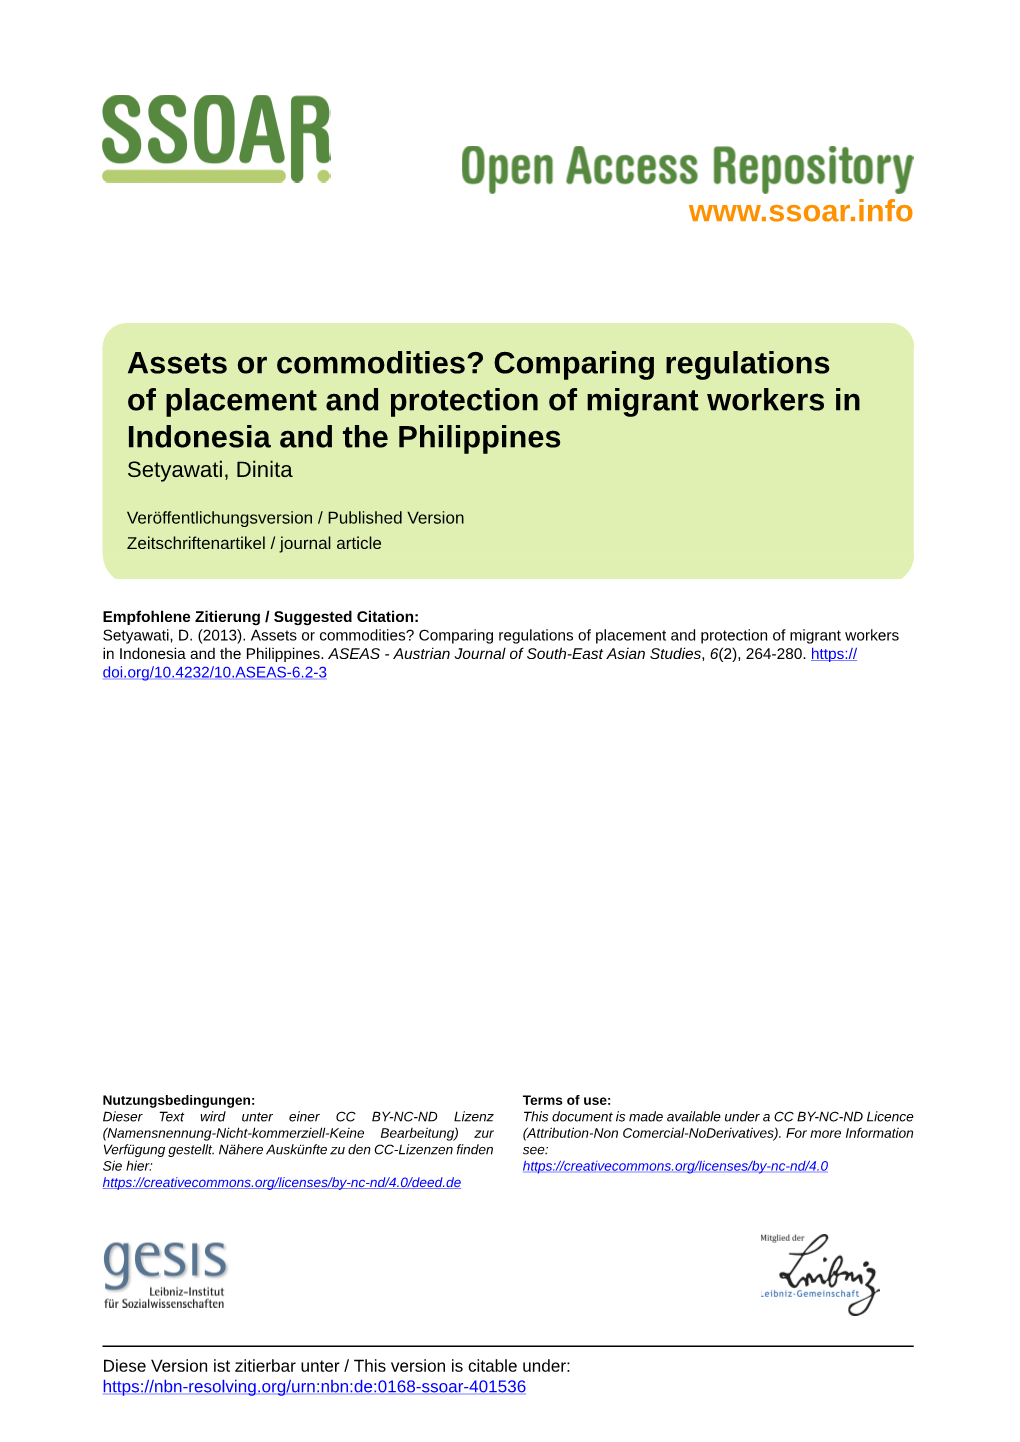 Comparing Regulations of Placement and Protection of Migrant Workers in Indonesia and the Philippines Setyawati, Dinita